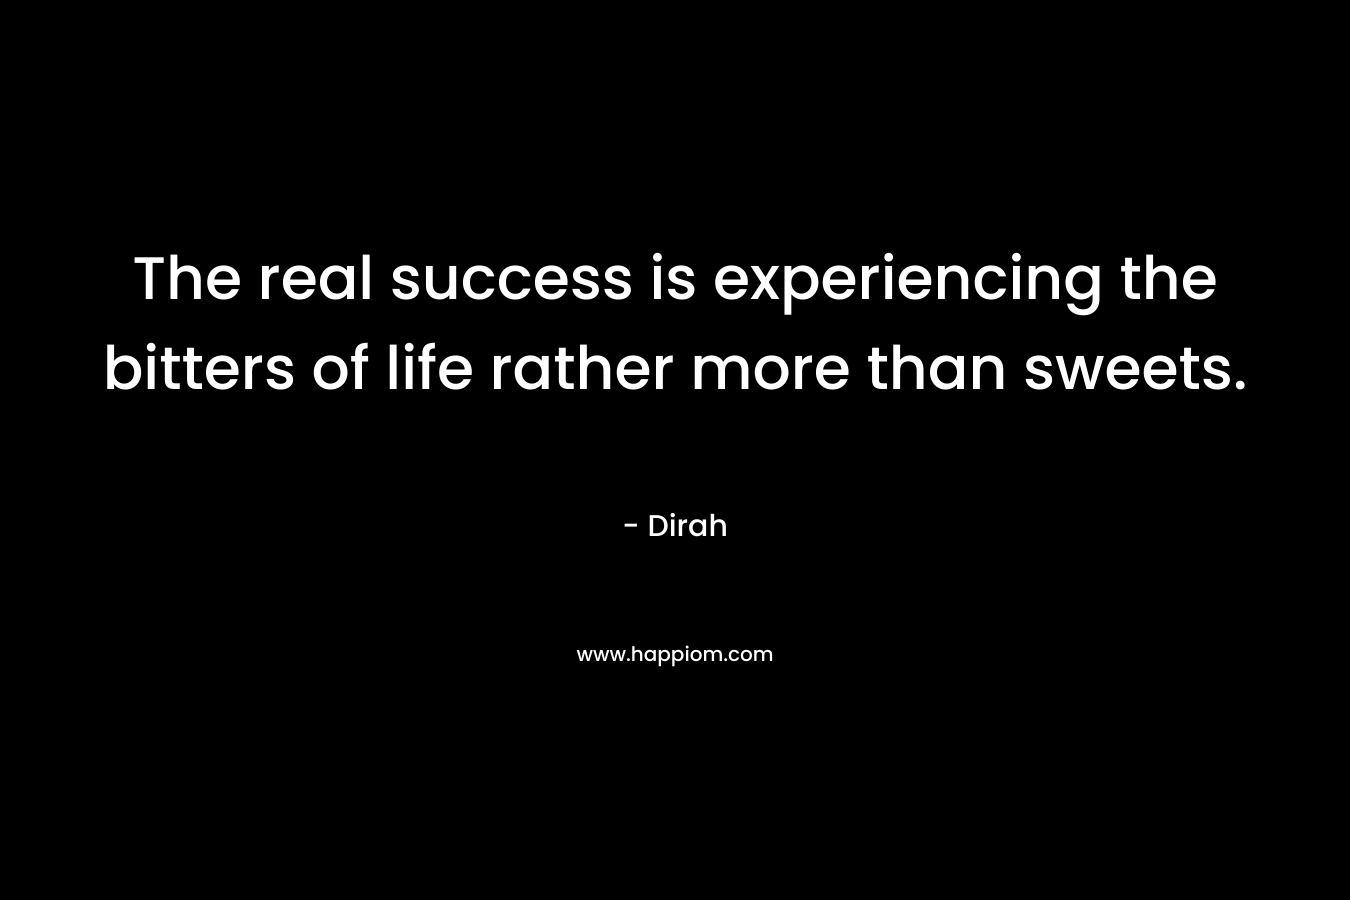 The real success is experiencing the bitters of life rather more than sweets. – Dirah